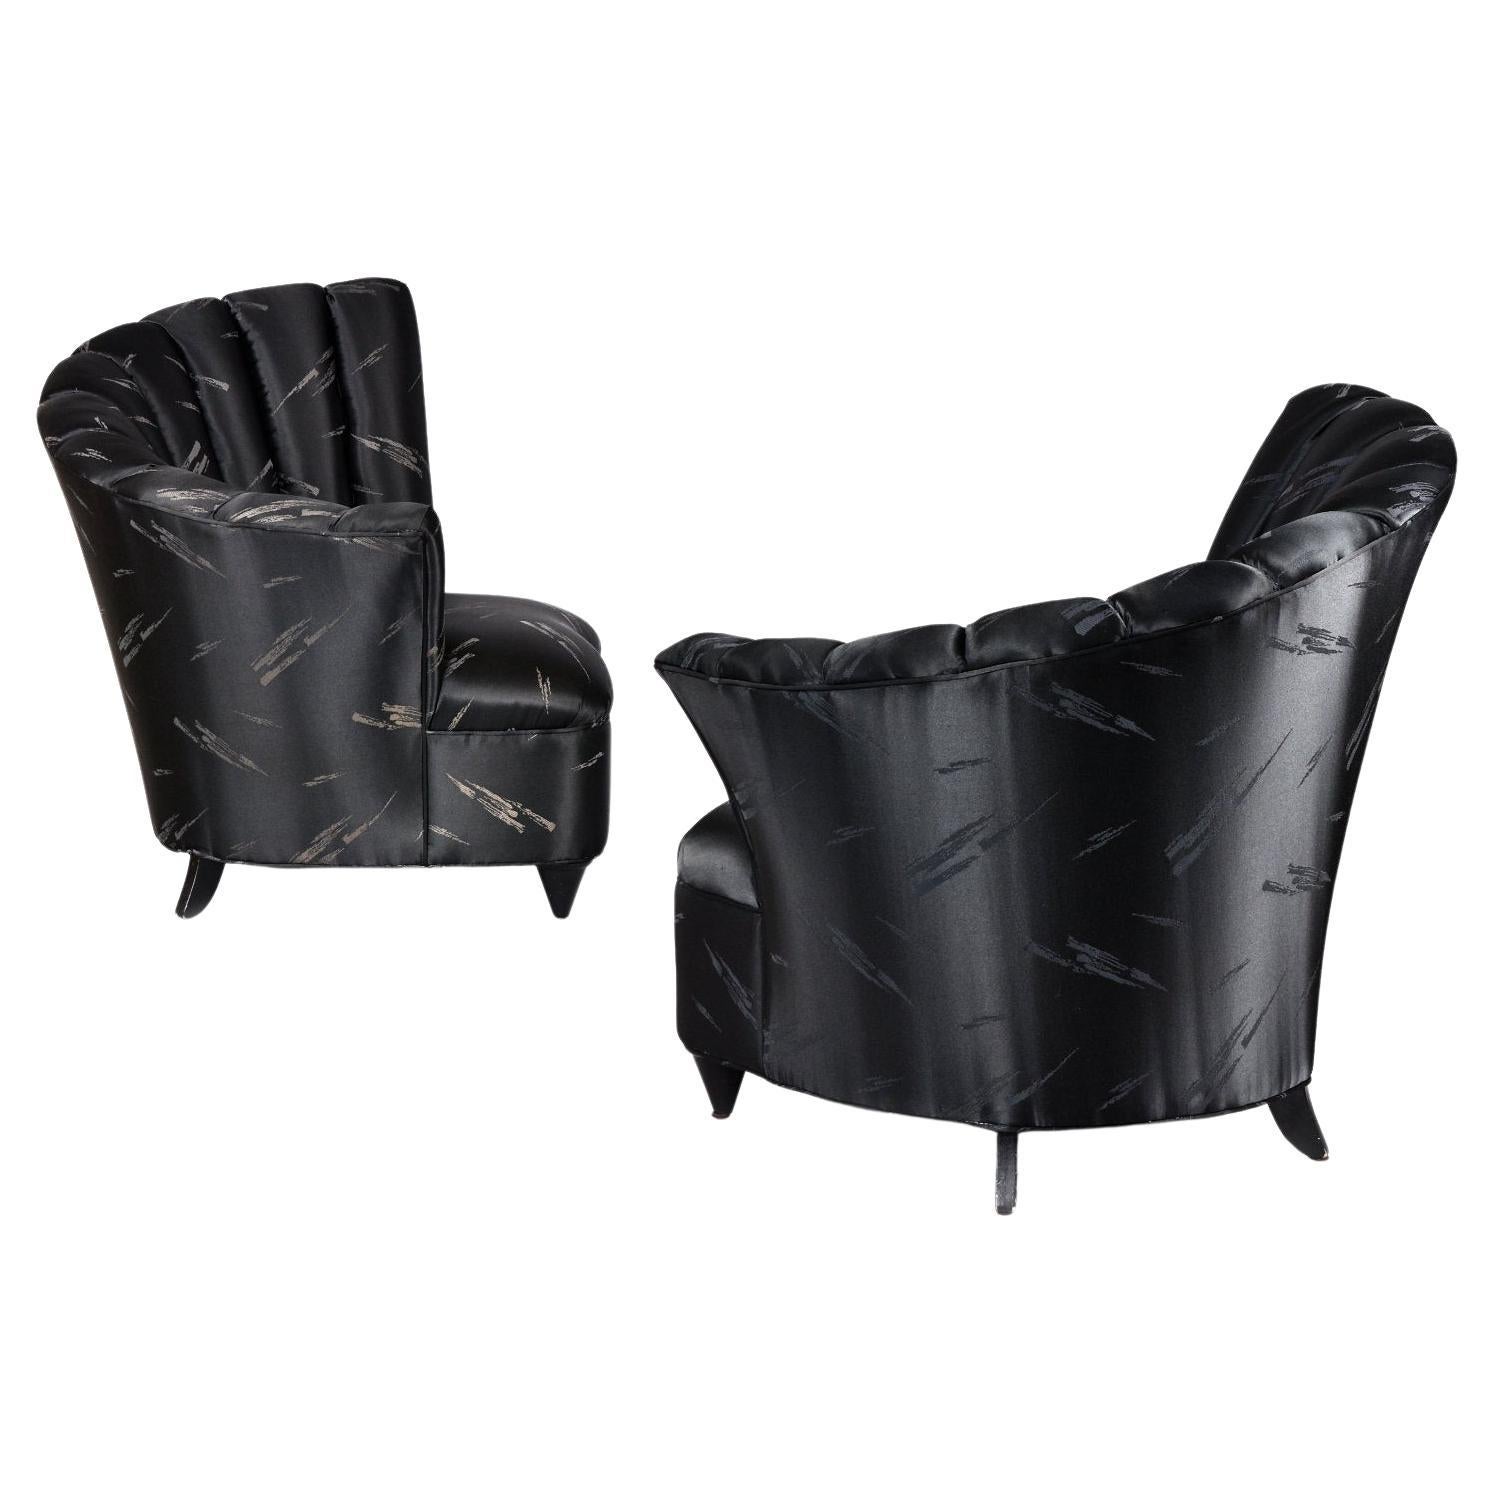 Pair of vintge 1980s Post-Modern / Neo-Deco style black slipper chairs. These chairs fully embody the glamour of the Nineteen-Laties (latter part of the 20th Century). The black fabric is satin-like with a lustrous sheen. There is a black on black